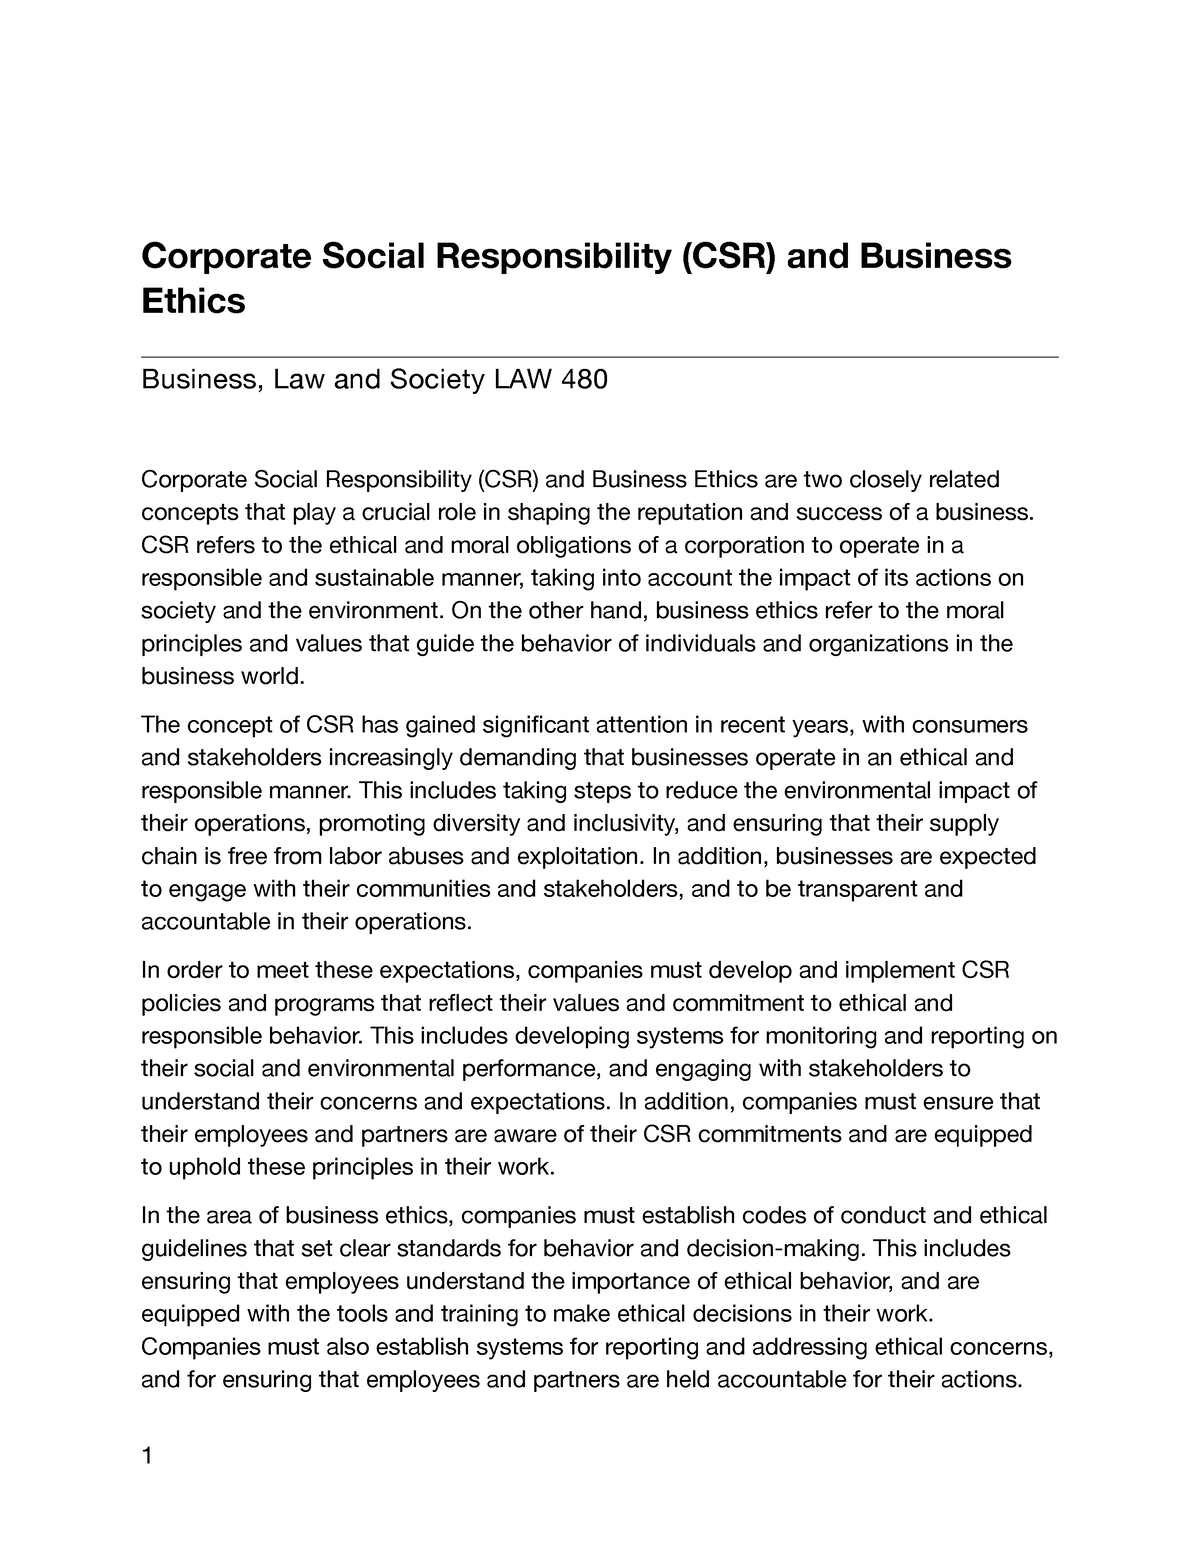 corporate social responsibility and business ethics essay